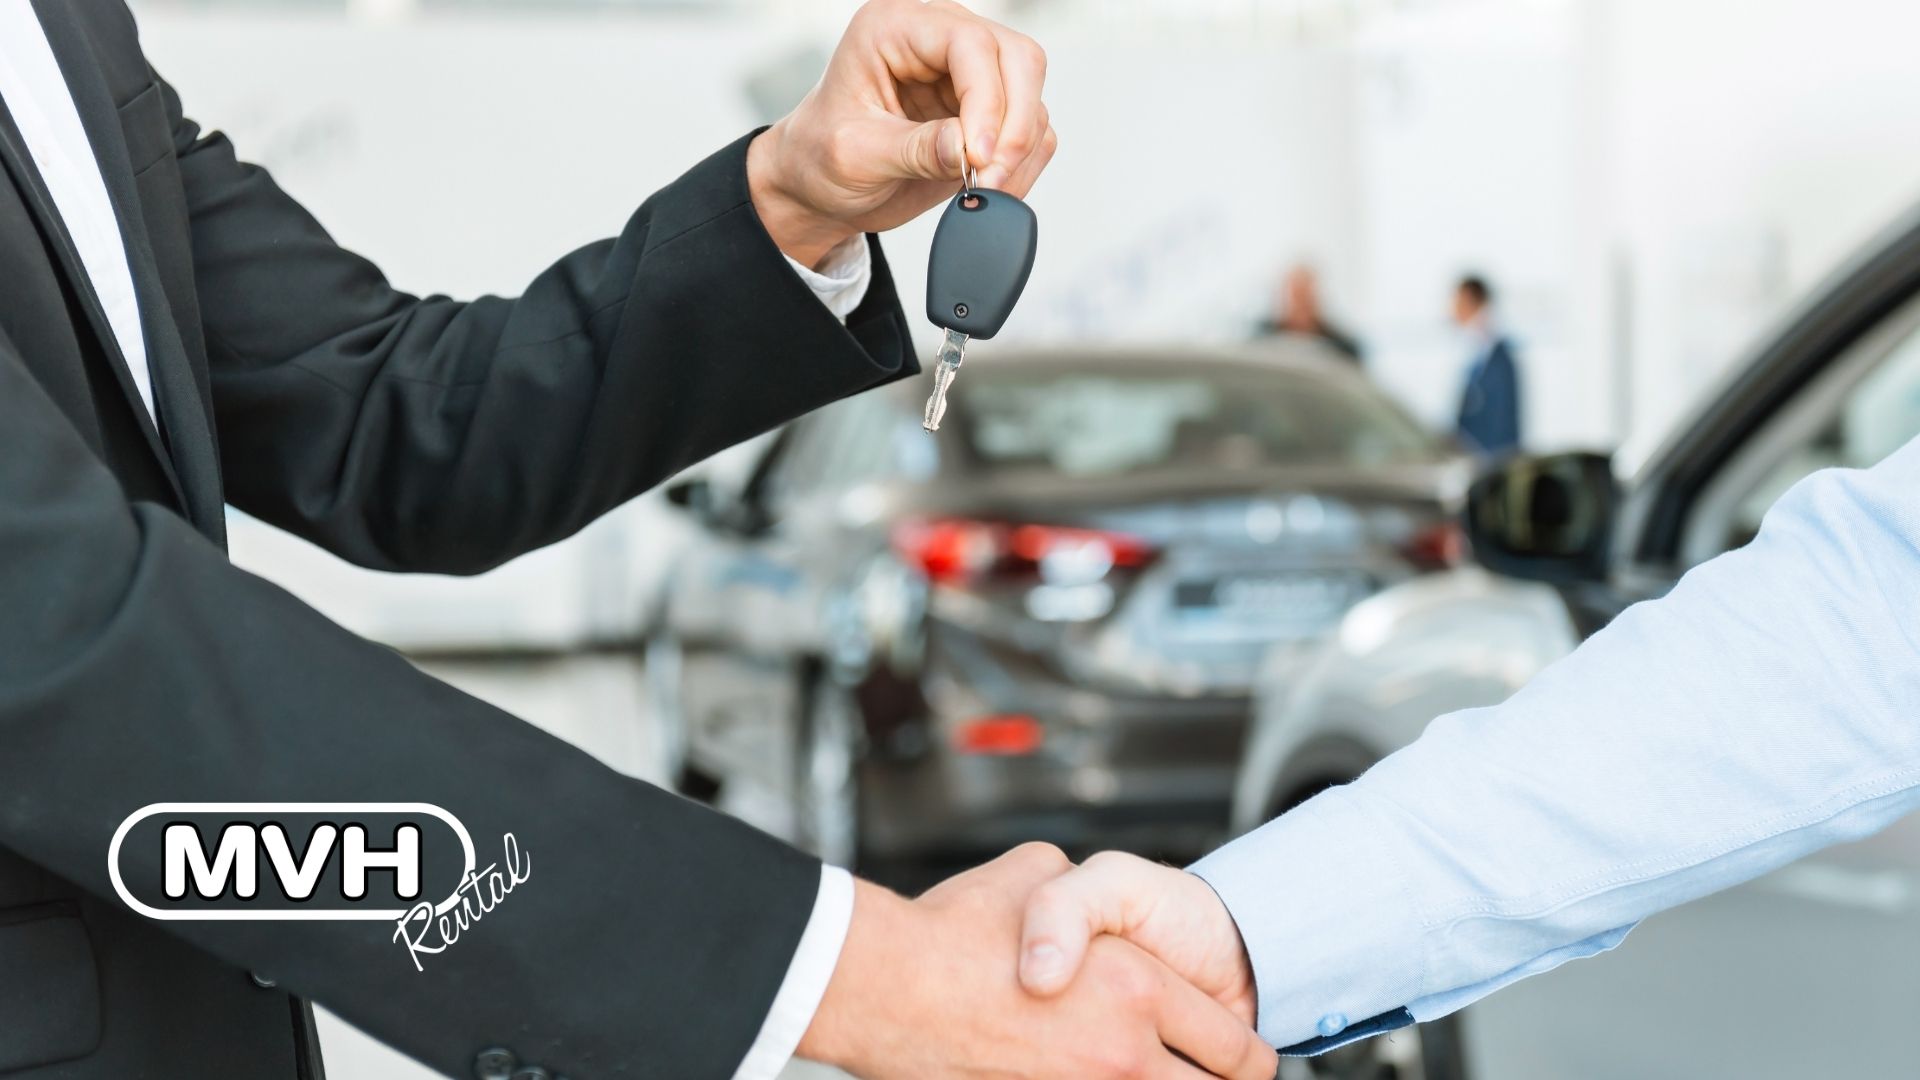 Are you planning to hire a car? Why choose a local independent firm? Discover the benefits over using a national company.
